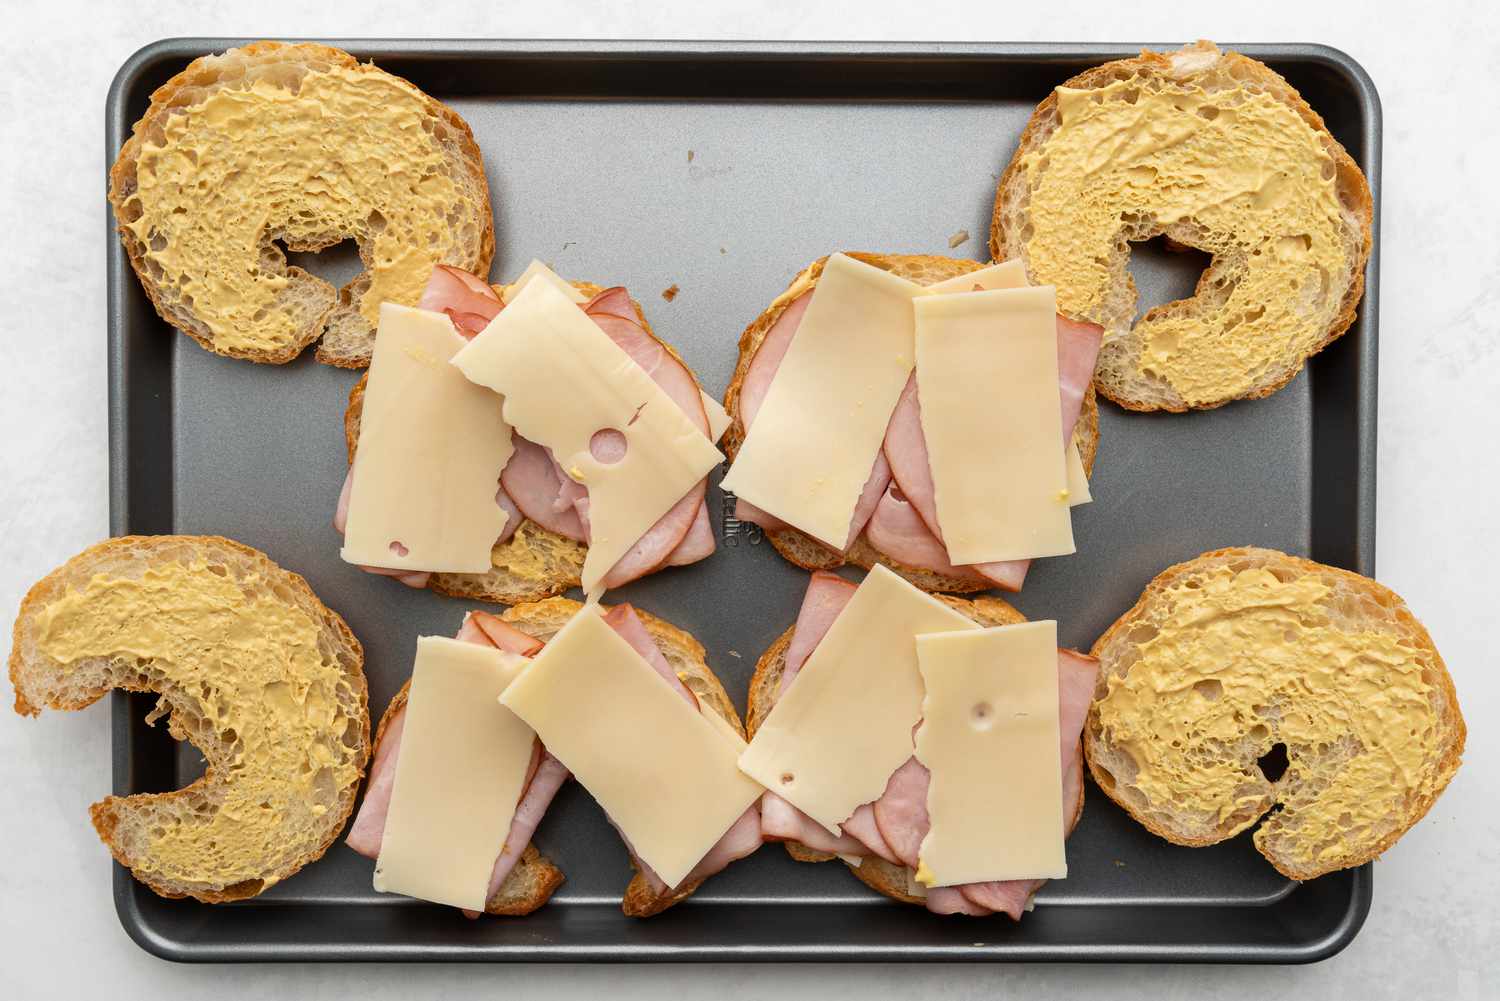 Assembling ham and cheese croissants on a baking sheet